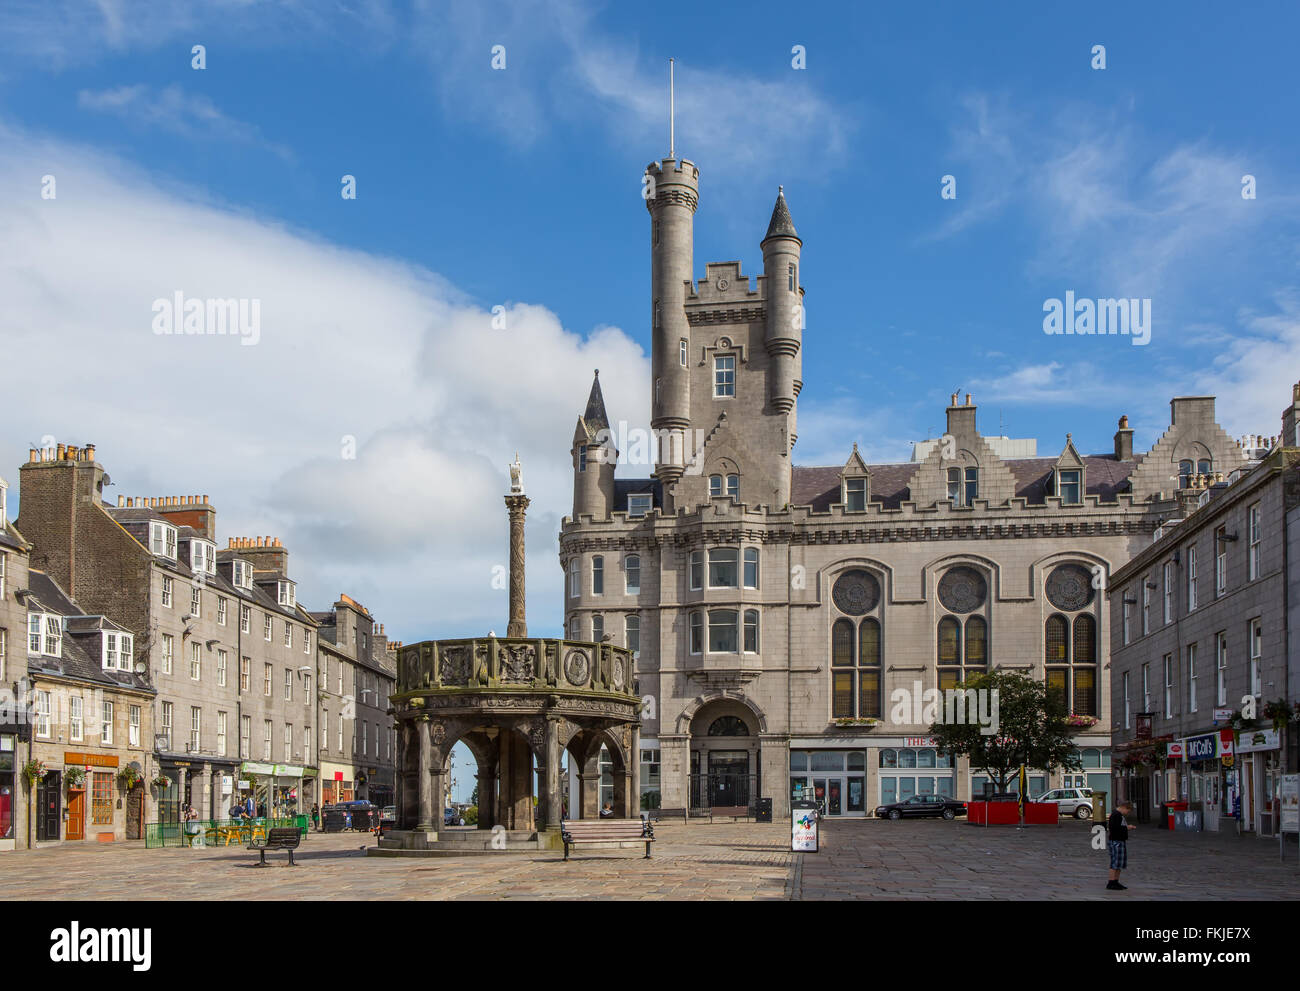 The Castlegate in Aberdeen, Scotland, UK, with the Mercat Cross in the foreground tand the Citadel building in the background Stock Photo